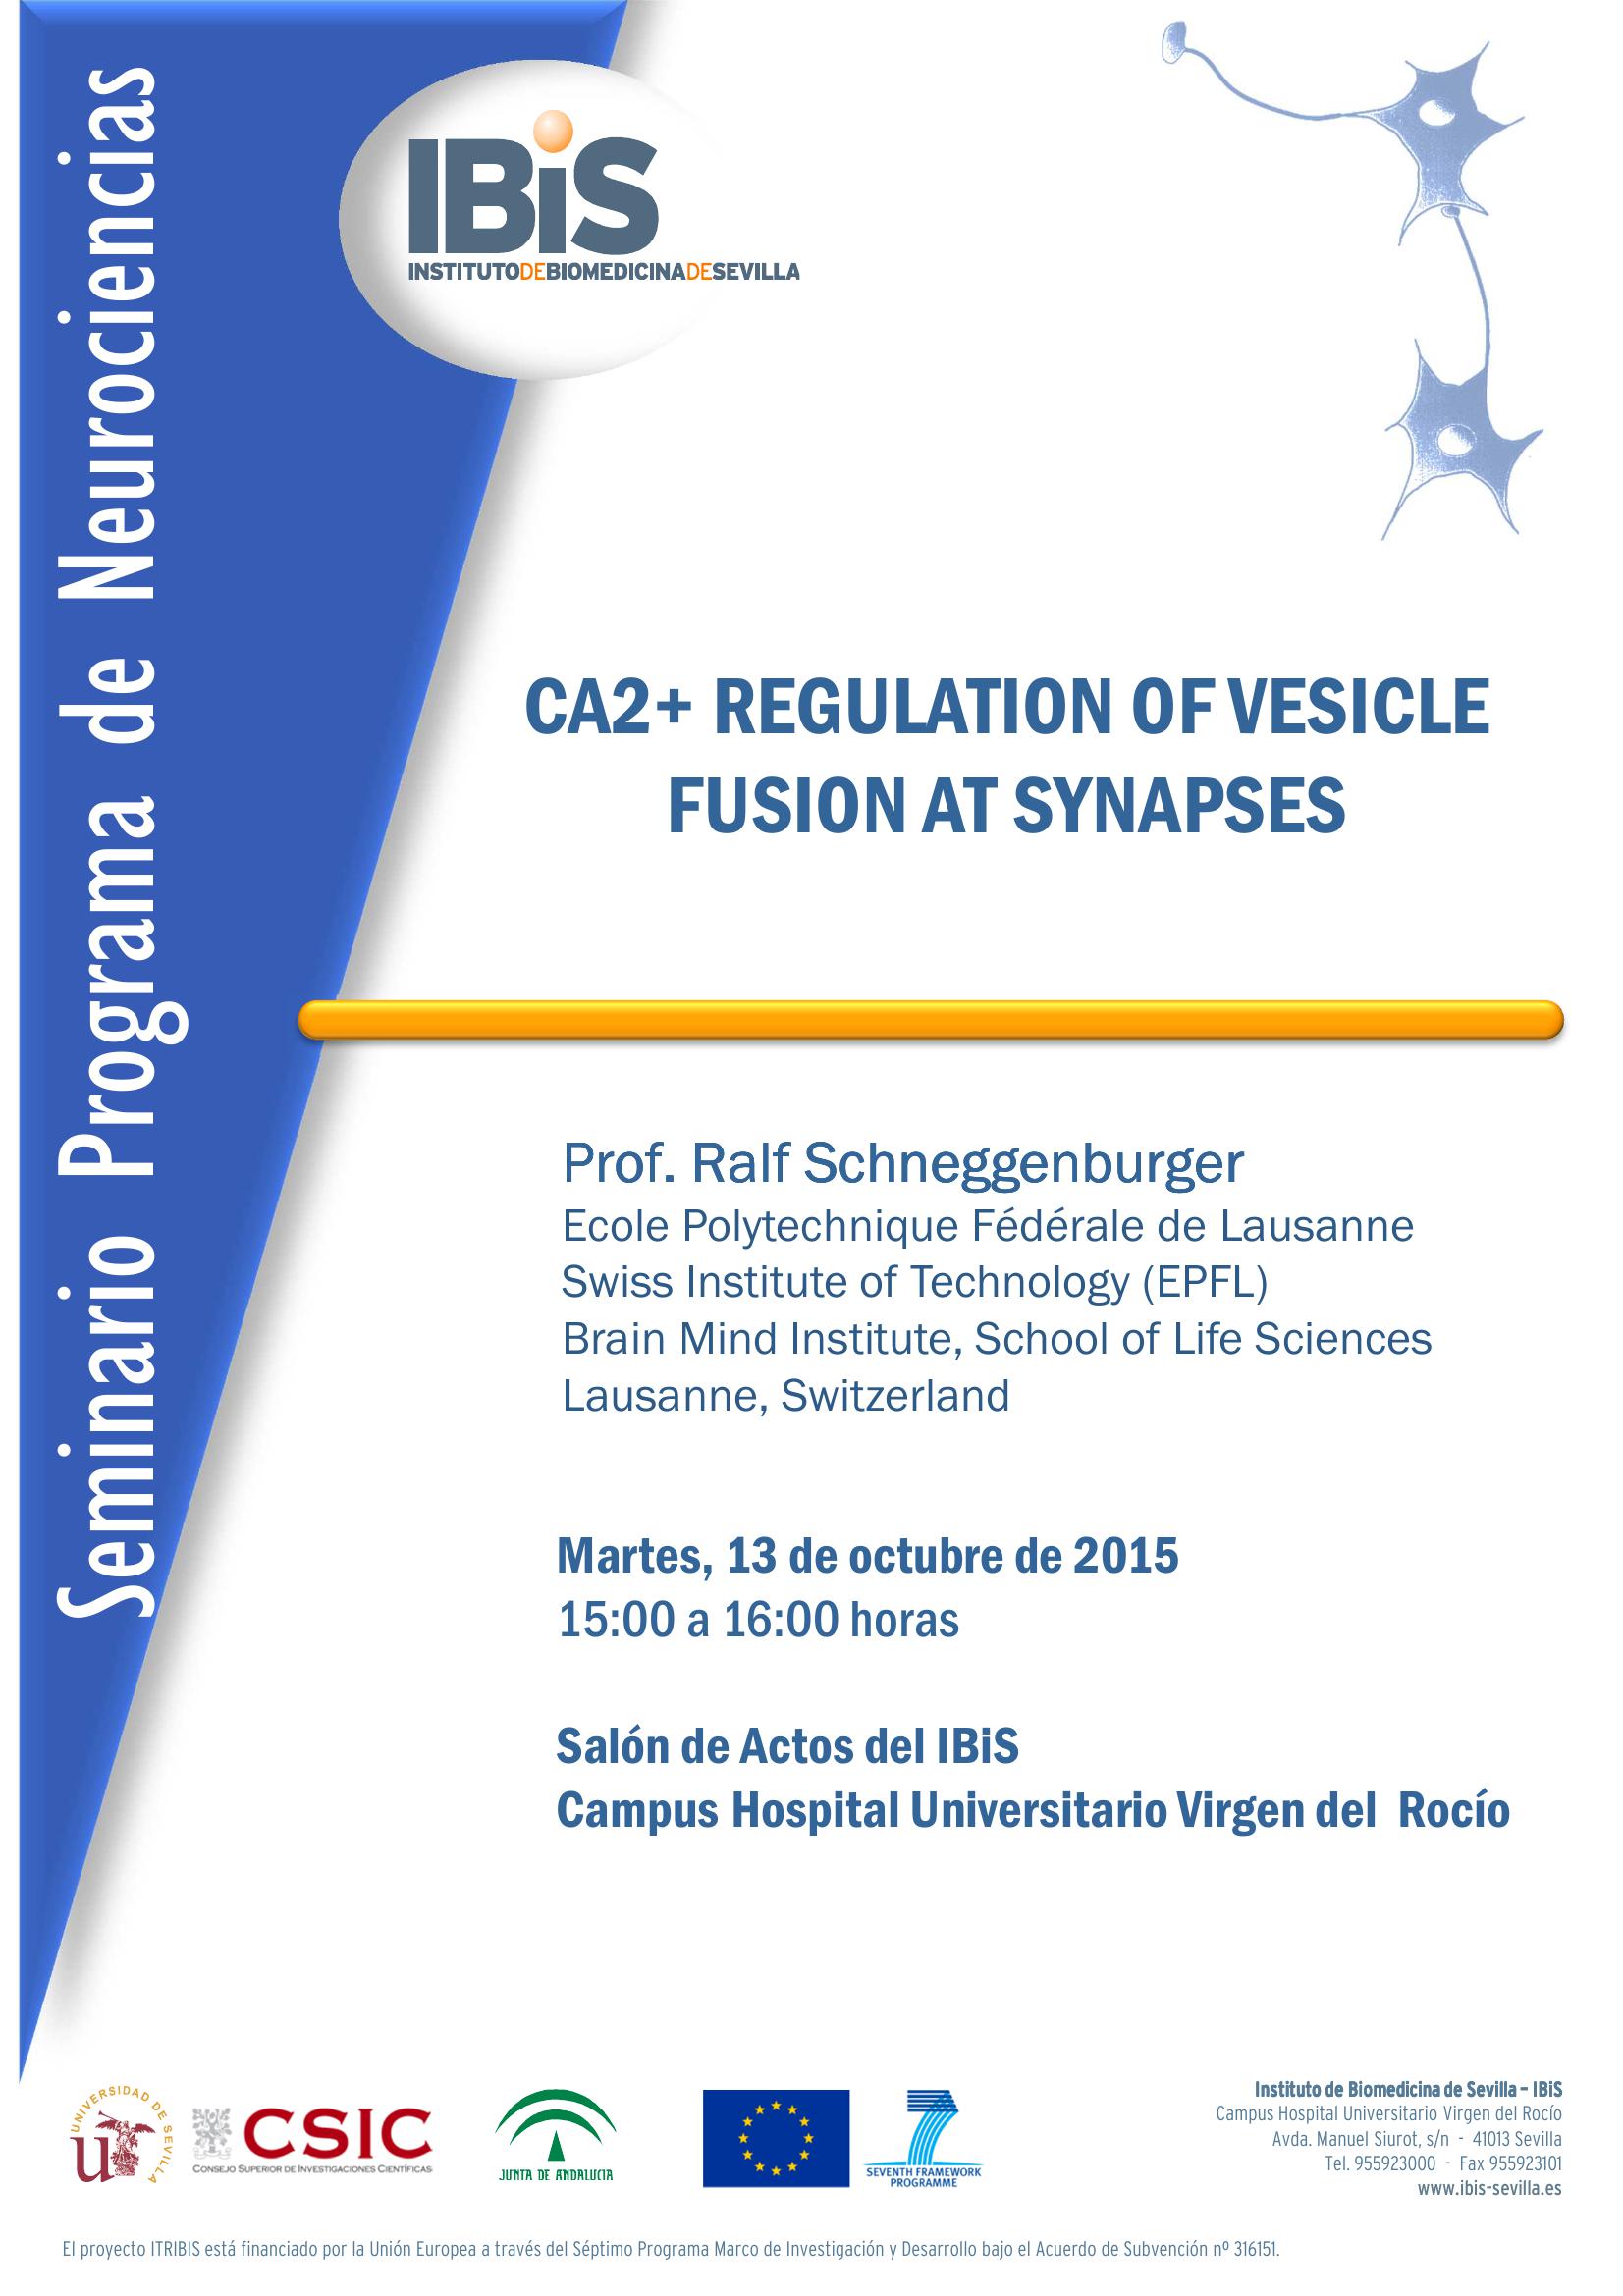 Poster: CA2+ REGULATION OF VESICLE FUSION AT SYNAPSES